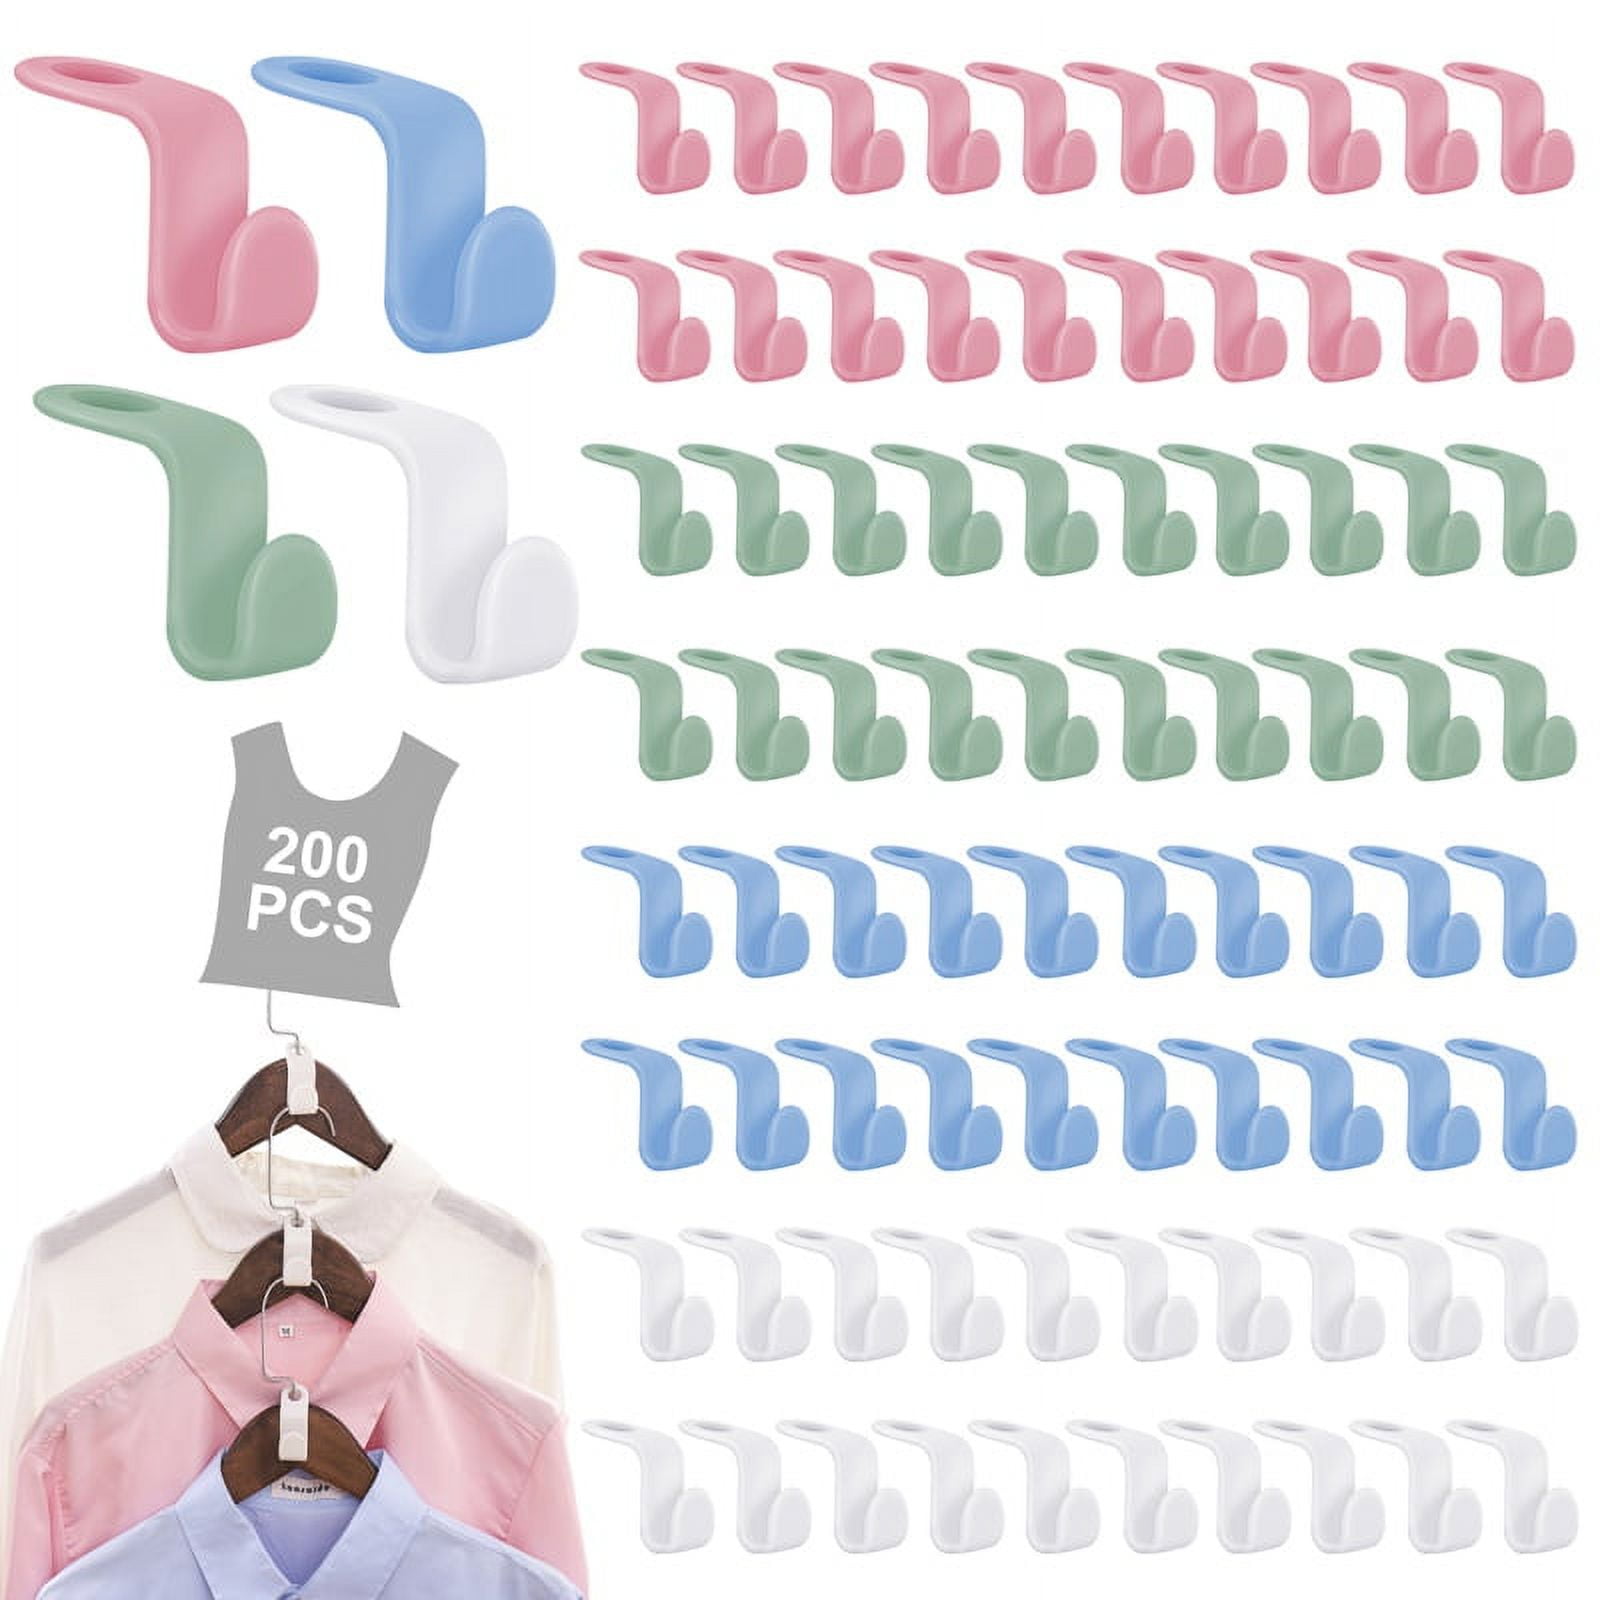 Mainstays Plastic Space Saving Cascading Clothing Hanger, 10 Pack, White